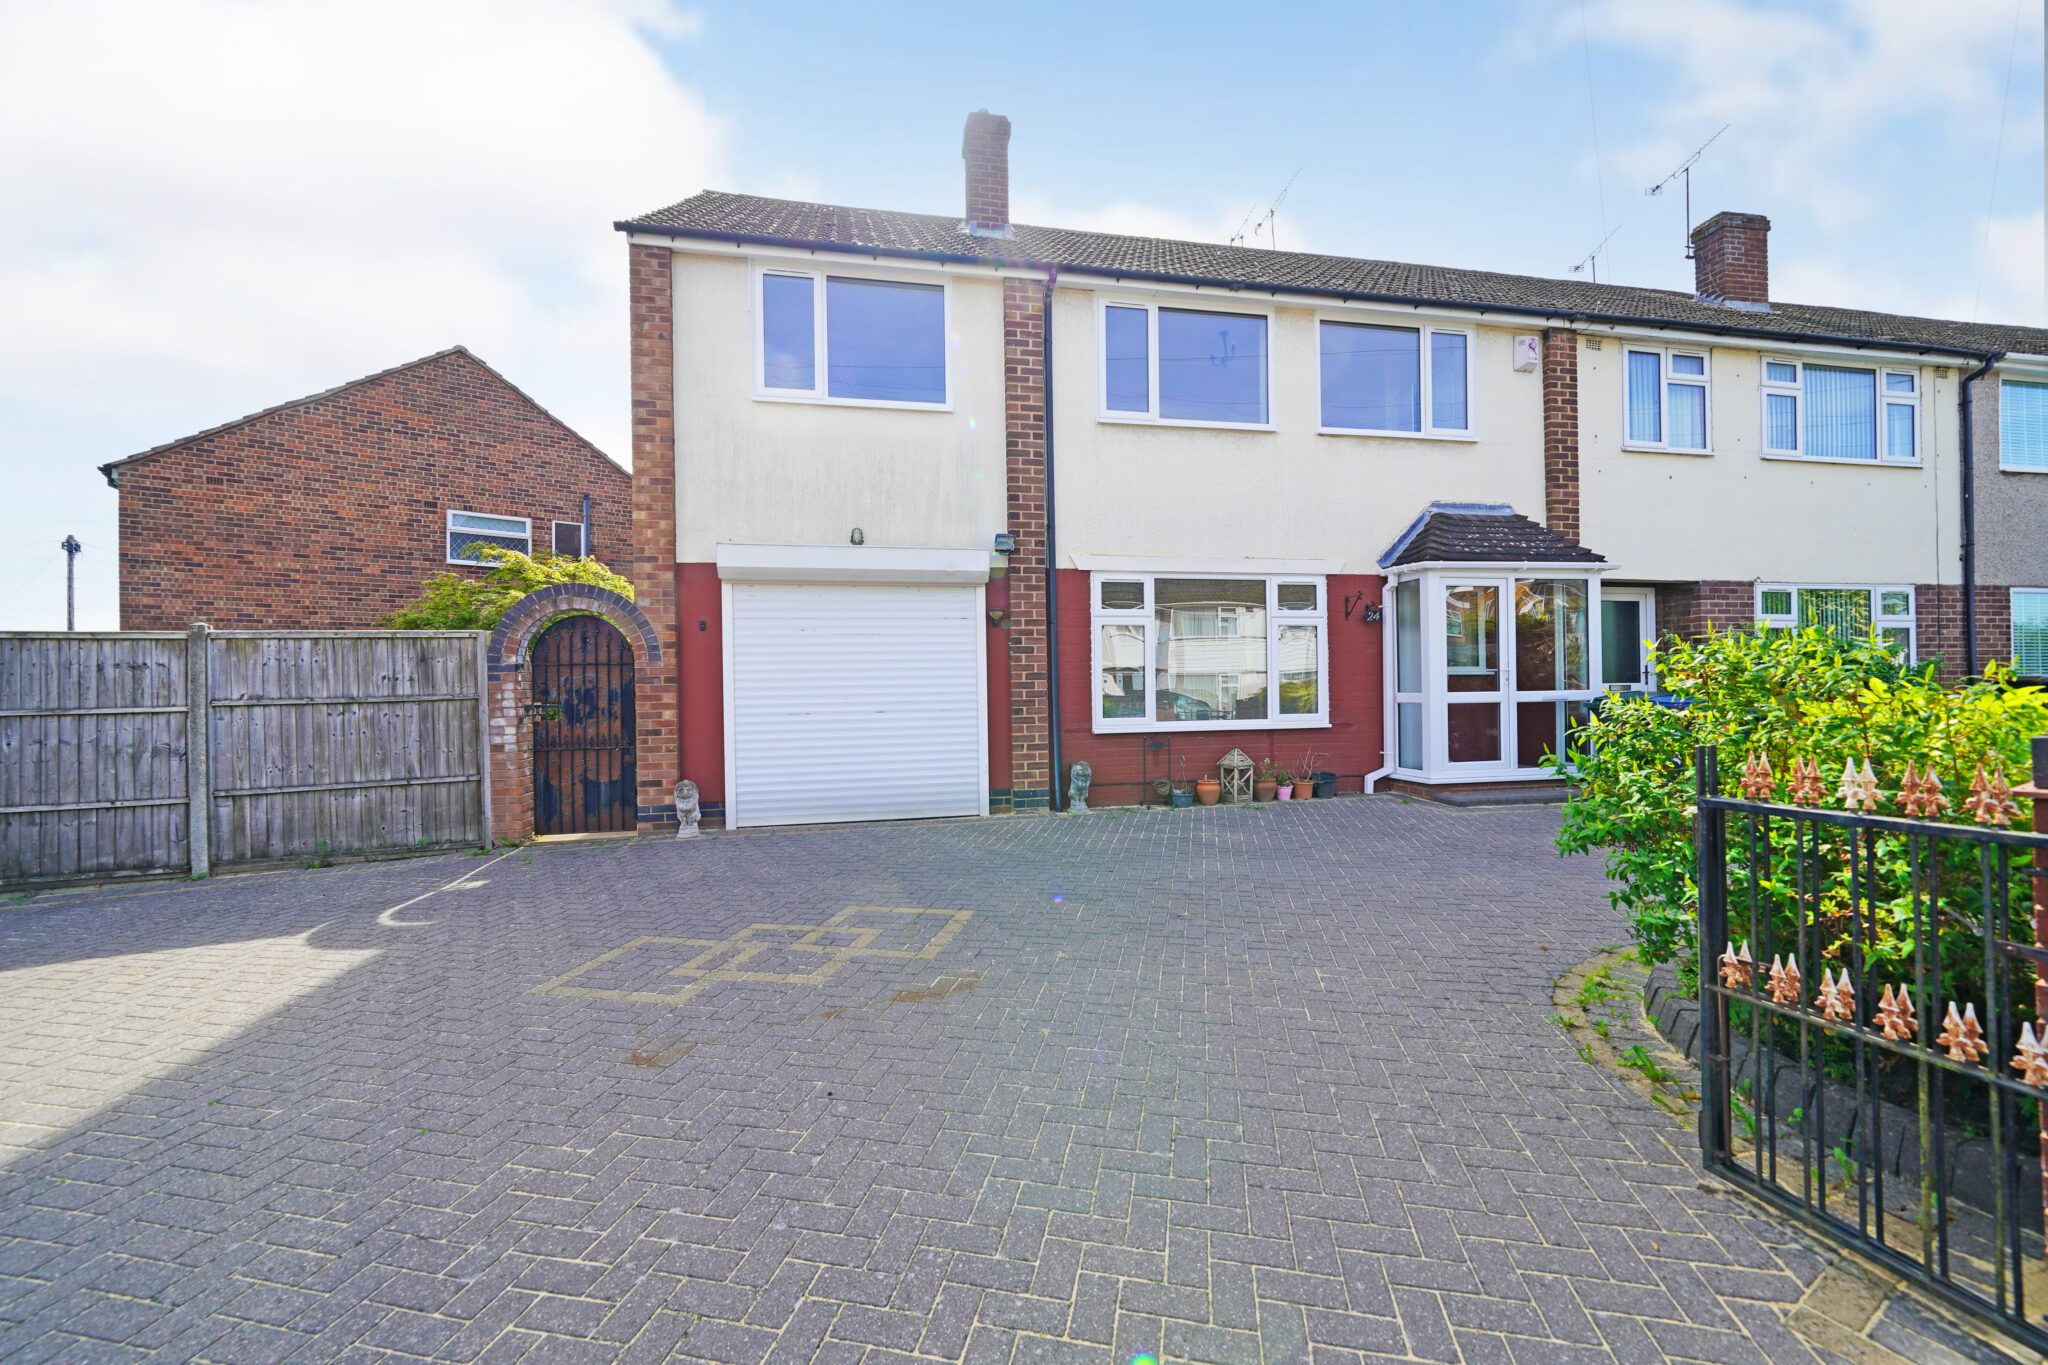 Bletchley Drive, Coventry, Coventry, CV5 9LW